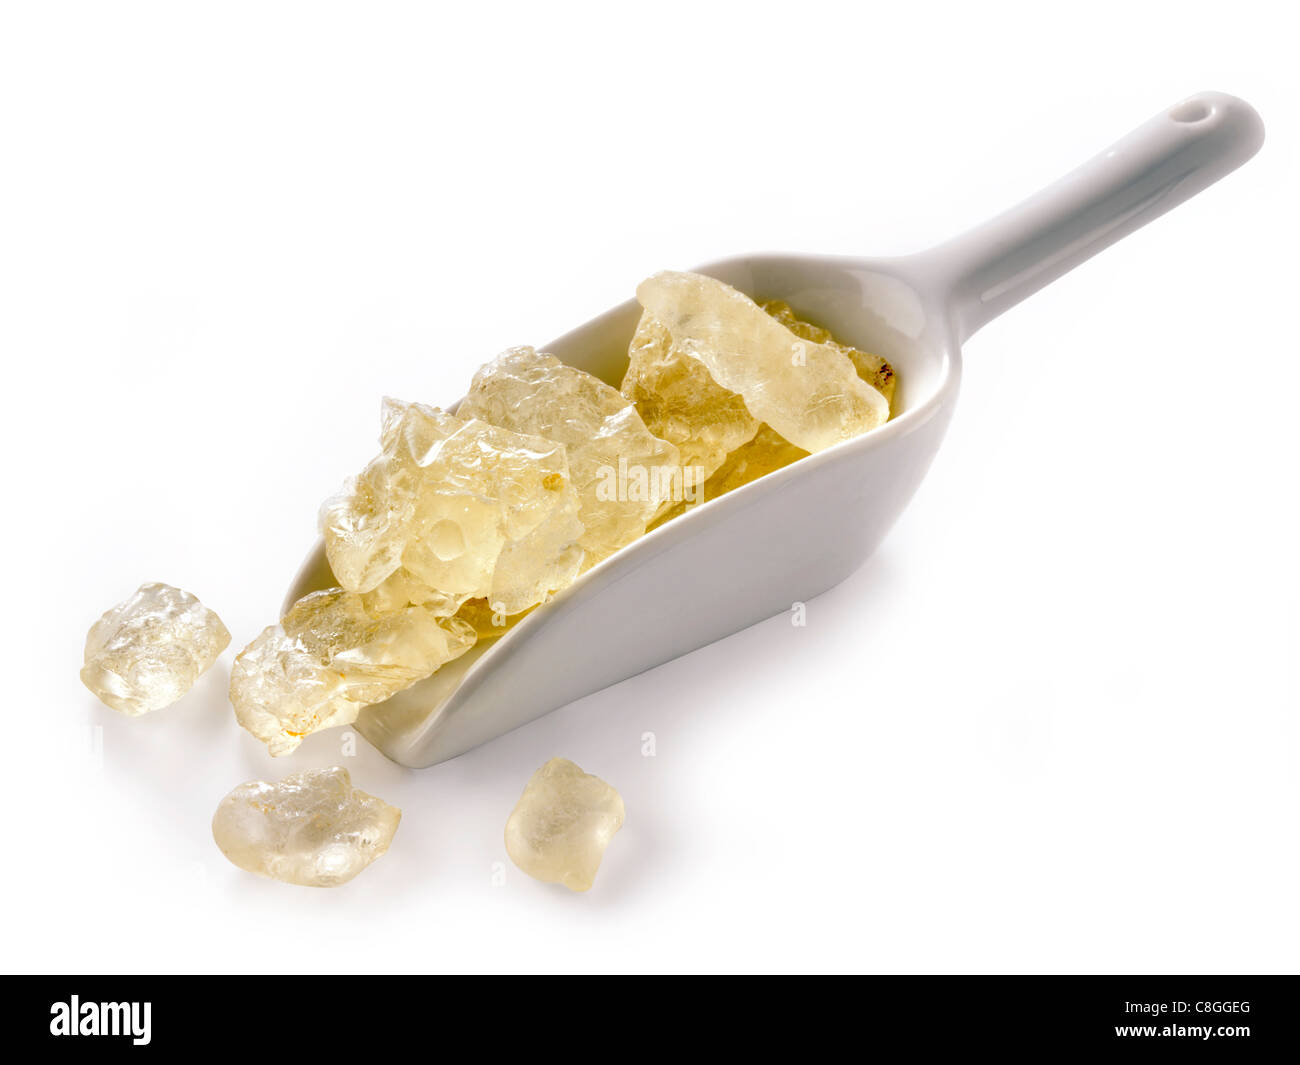 whole pieces of edible mastic against a white background Stock Photo